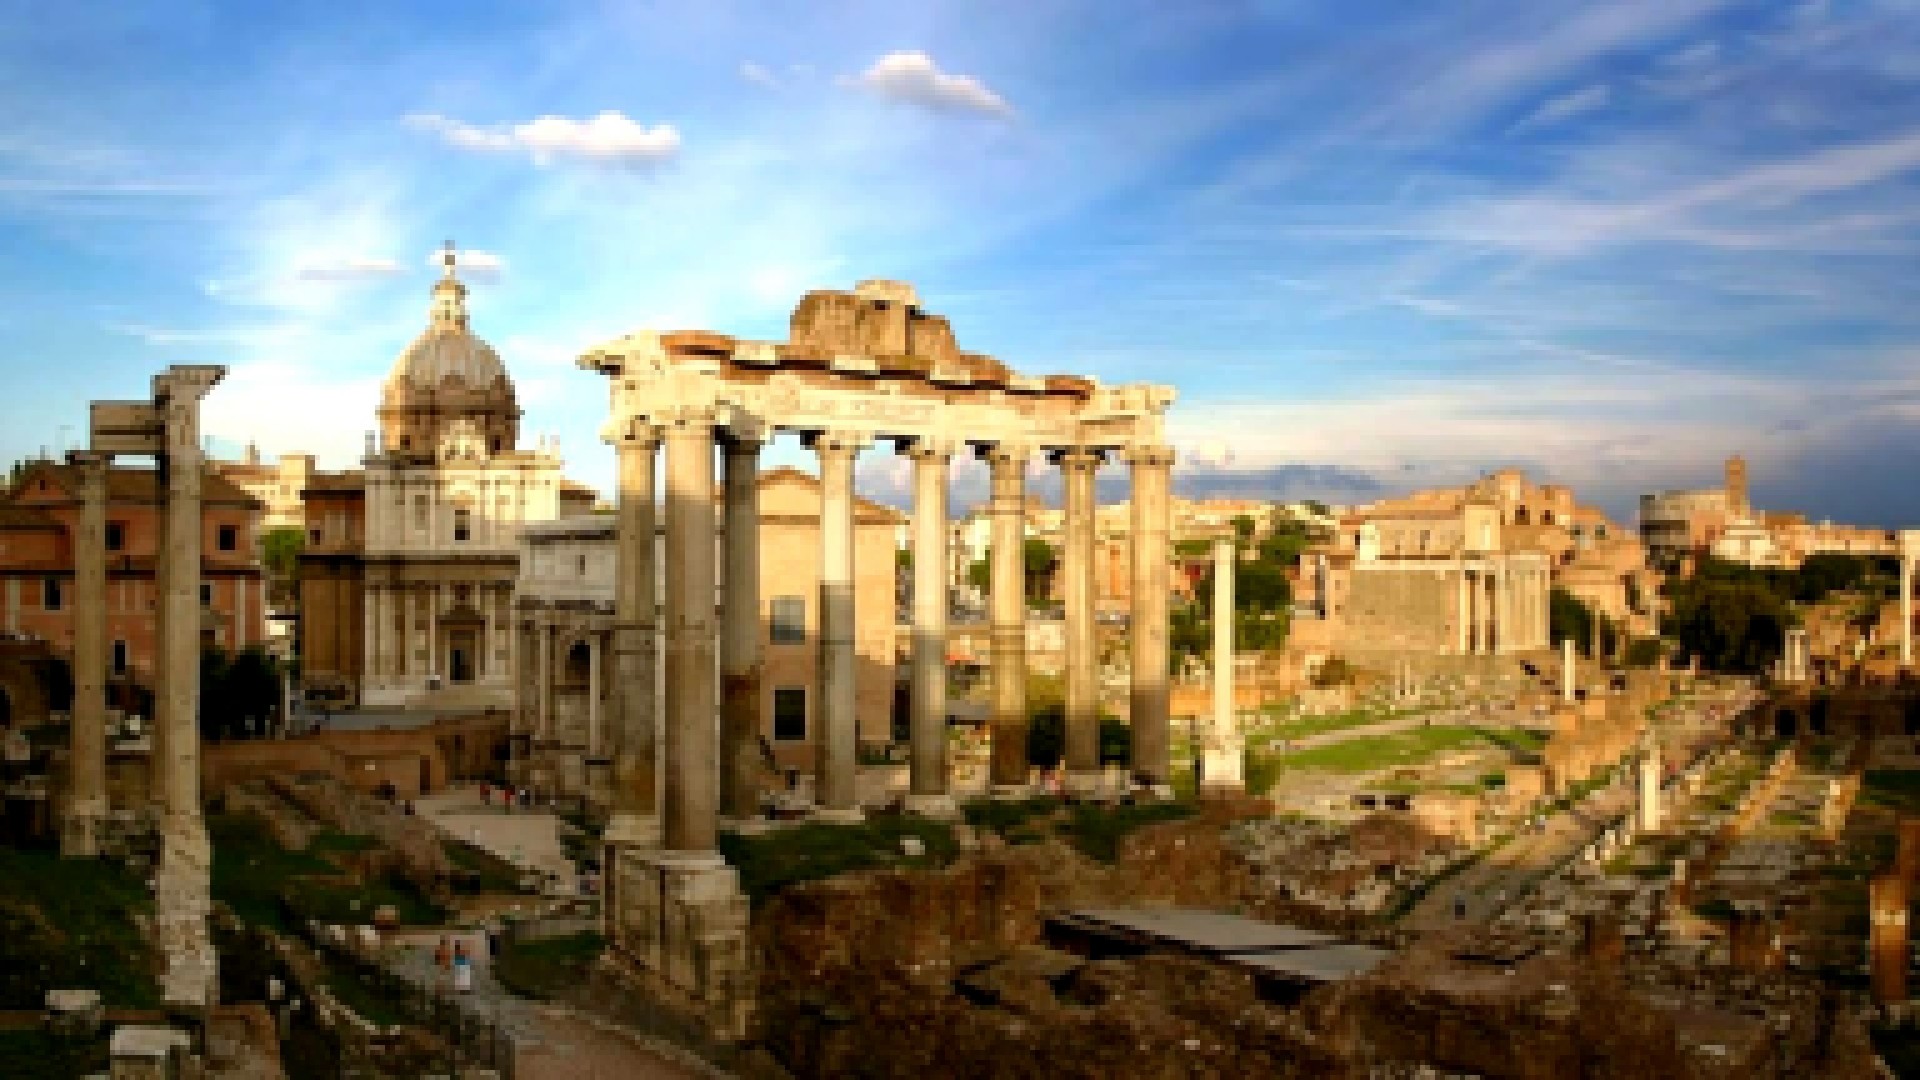 1920x1080 Ancient Roman Wallpaper Pictures to Pin on Pinterest PinsDaddy